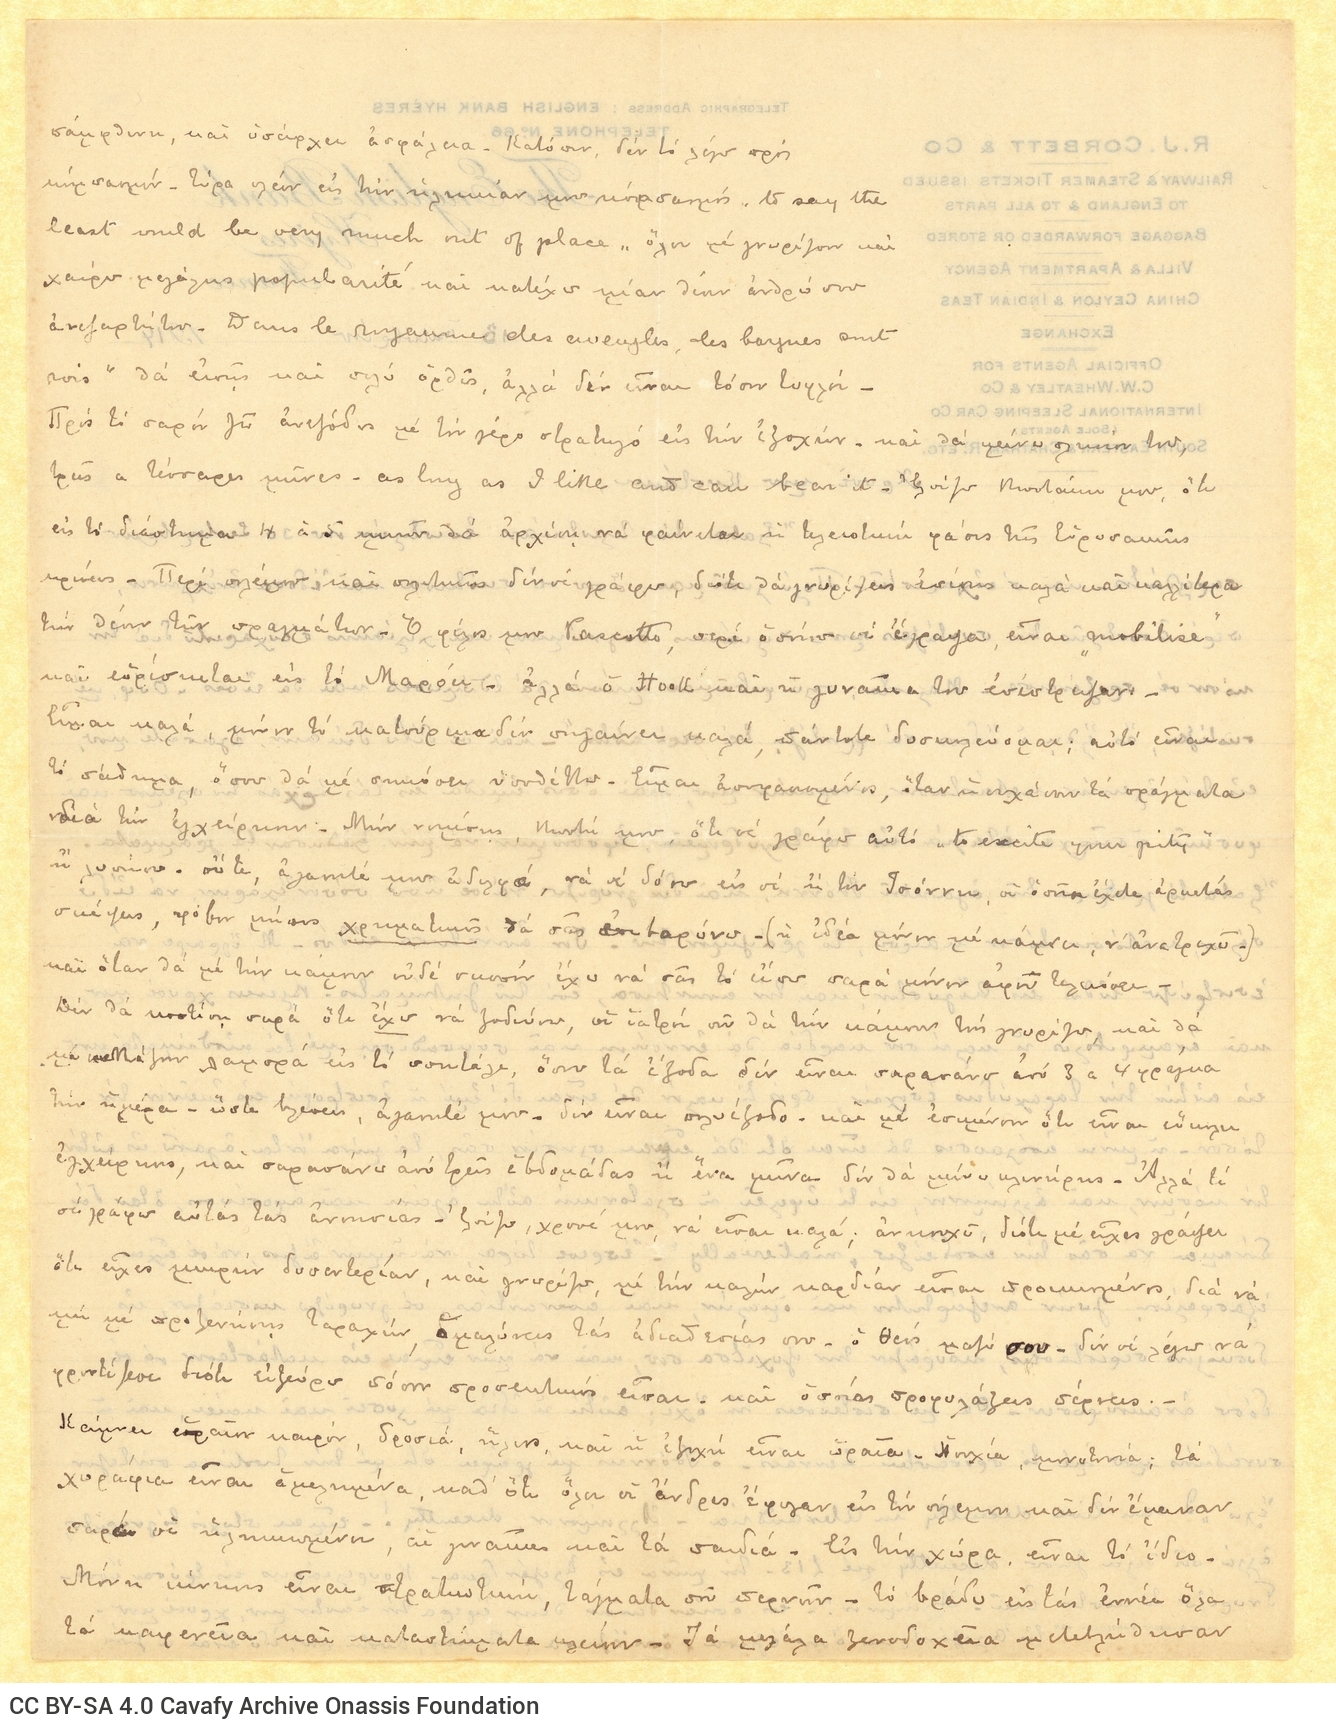 Handwritten letter by Paul Cavafy to C. P. Cavafy from Hyères, France, according to the letterhead, on both sides of two she